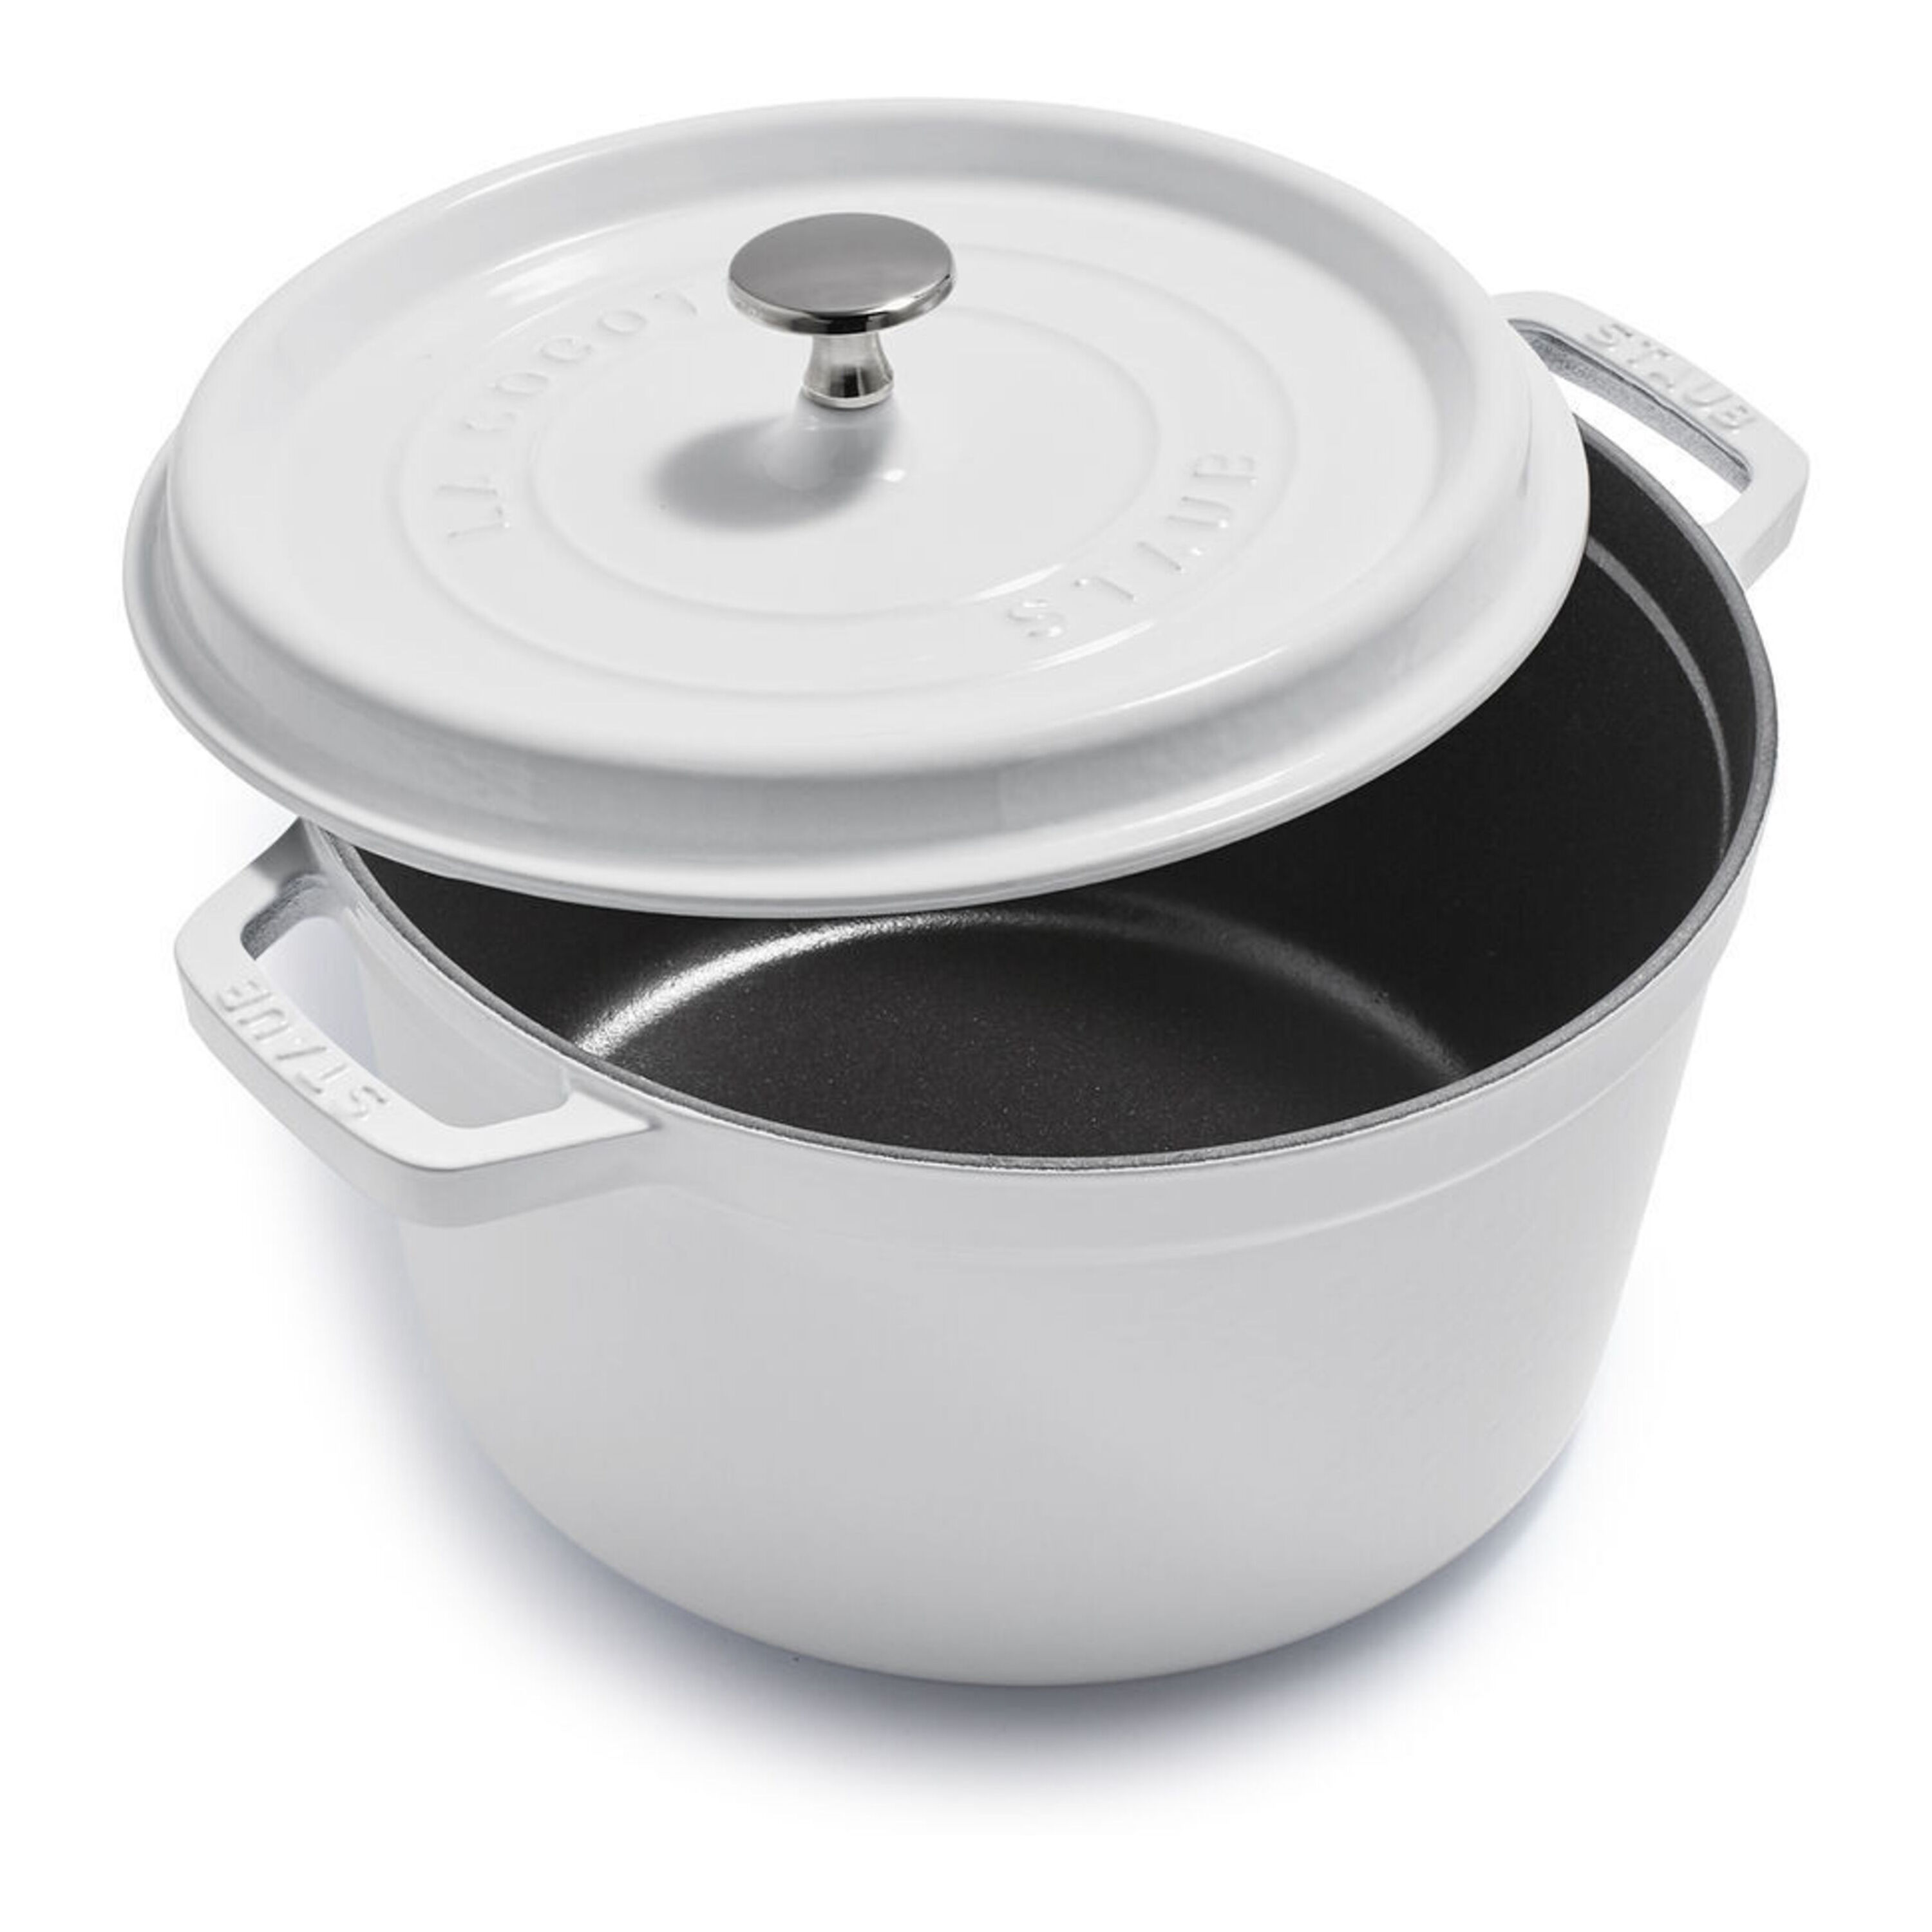 Staub Cast Iron Dutch Oven 5-qt Tall Cocotte, Made in France, Serves 5-6,  Graphite 